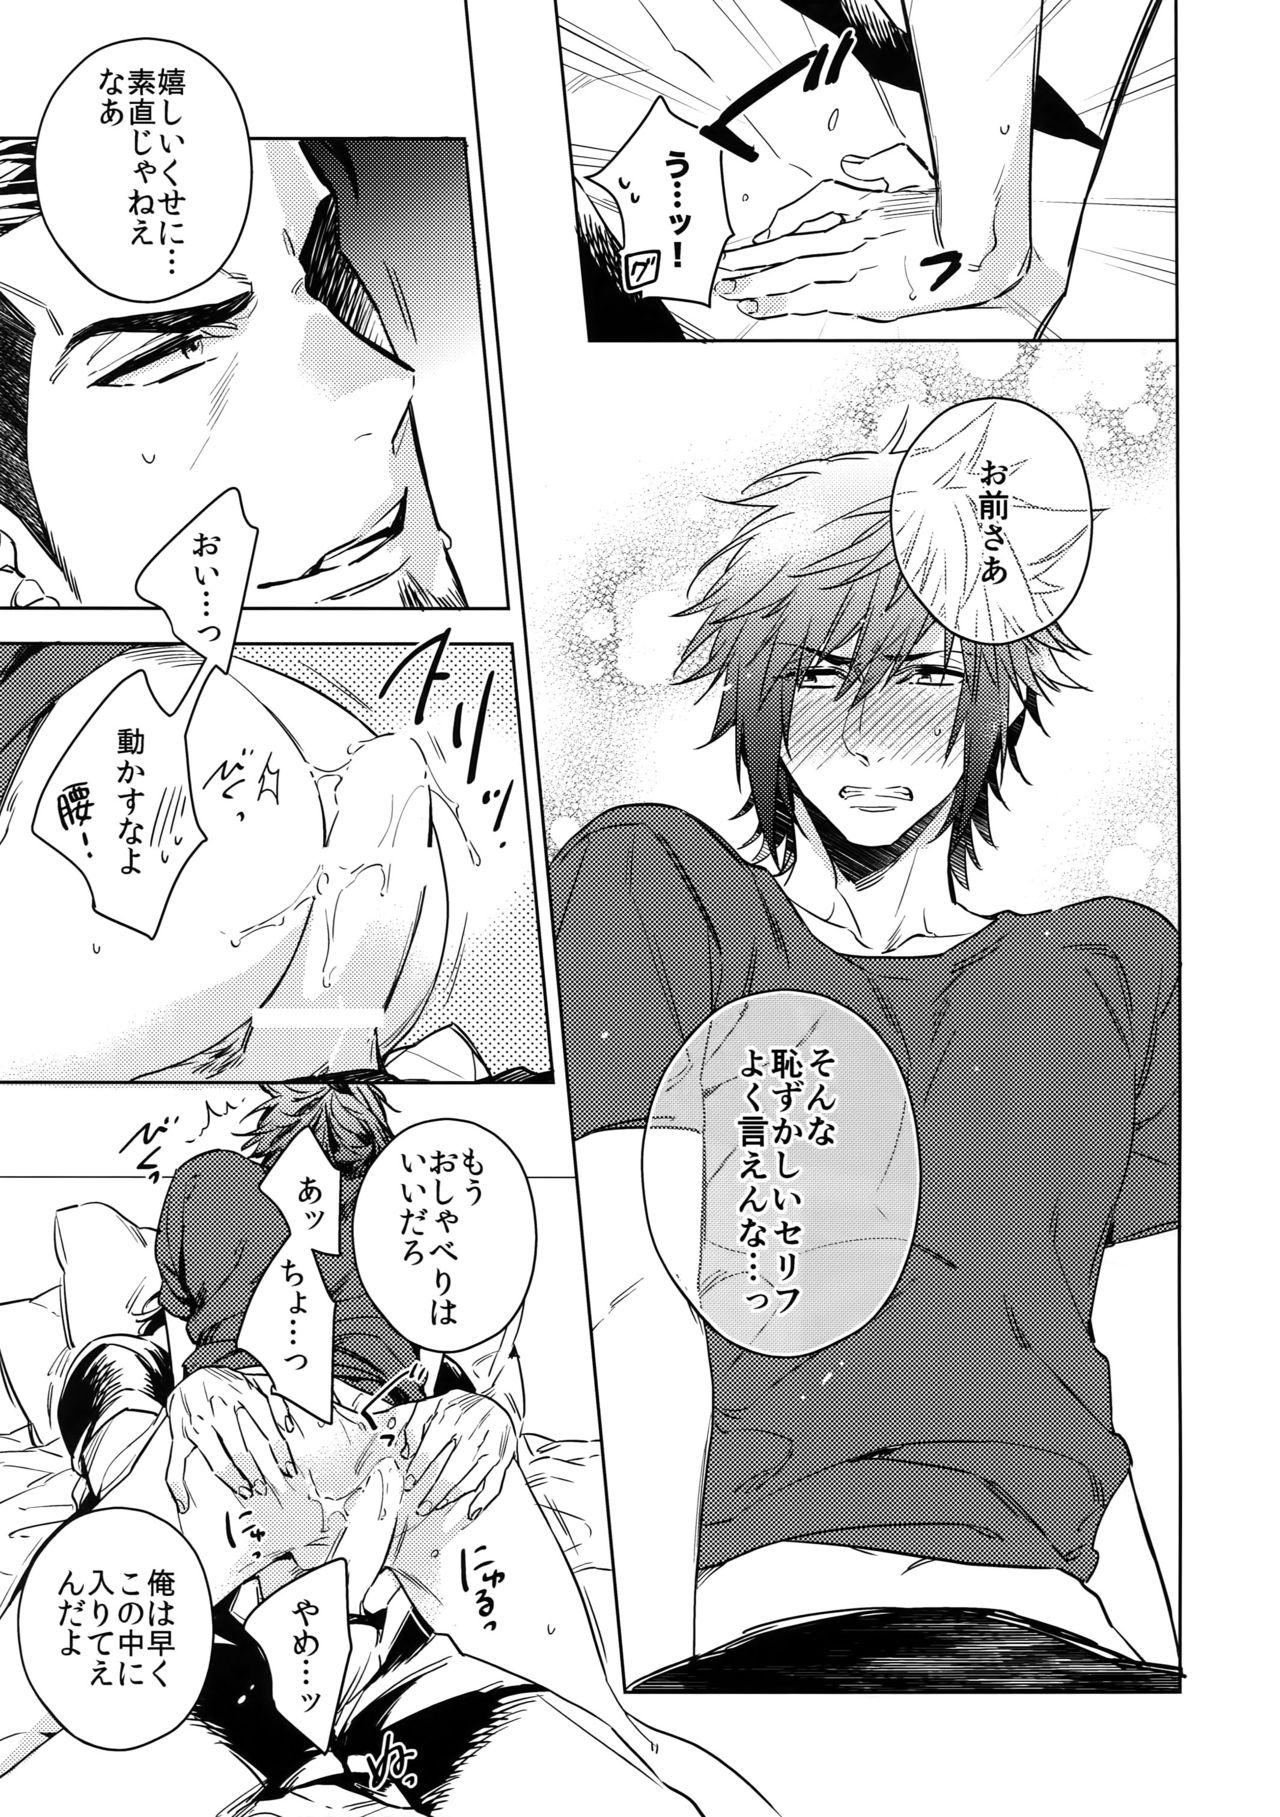 Bro You Are My King - Final fantasy xv Hot Women Having Sex - Page 12